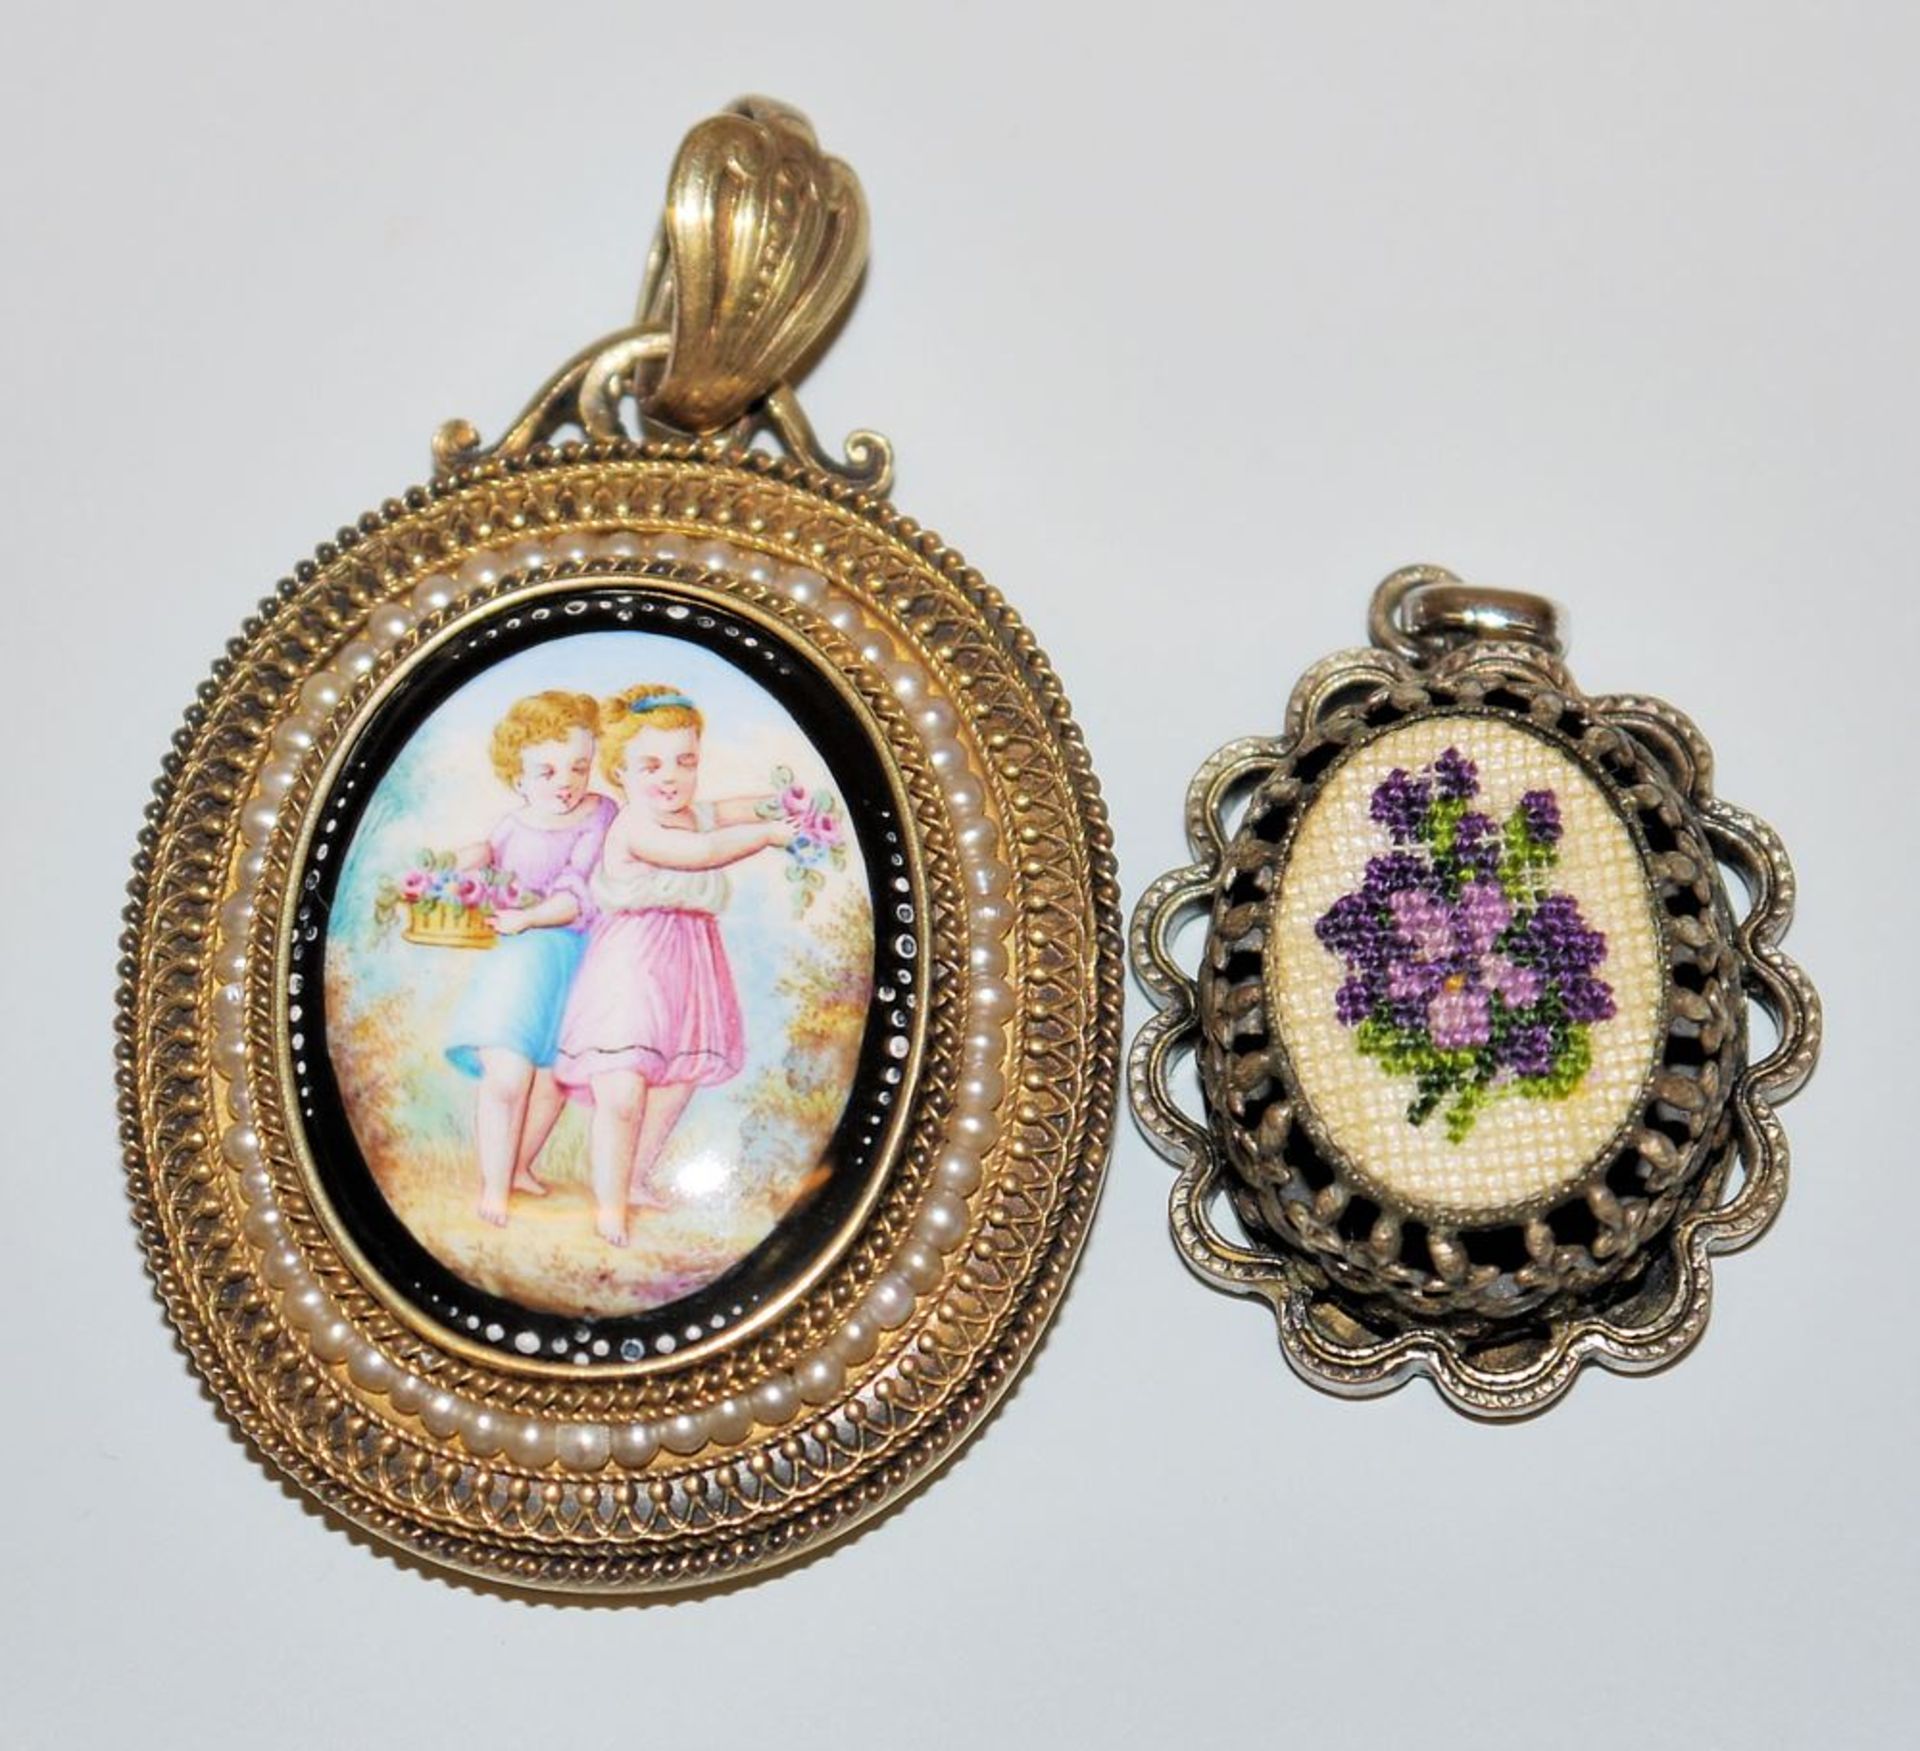 Two pendants of the 19th century with porcelain and embroidery, gold a.o.